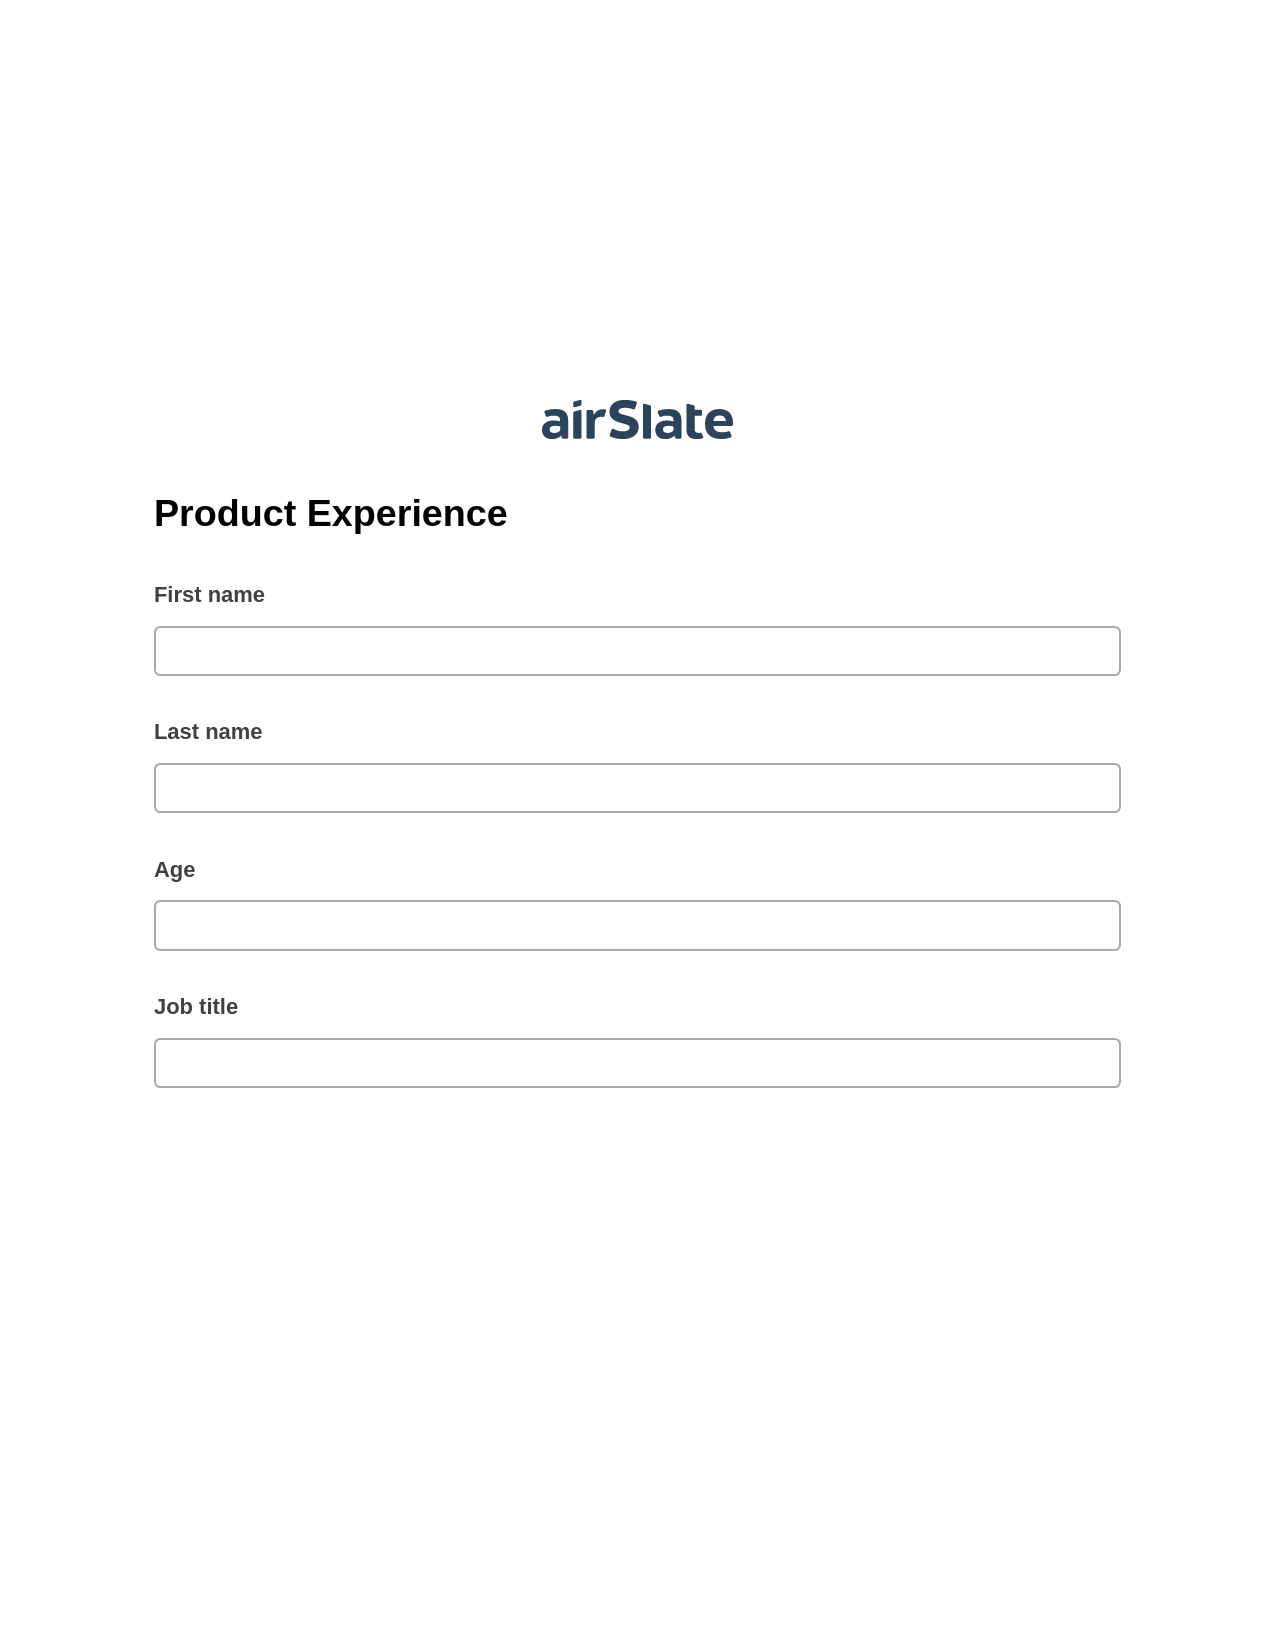 Product Experience Pre-fill from Salesforce Records Bot, Email Notification Bot, Export to Excel 365 Bot